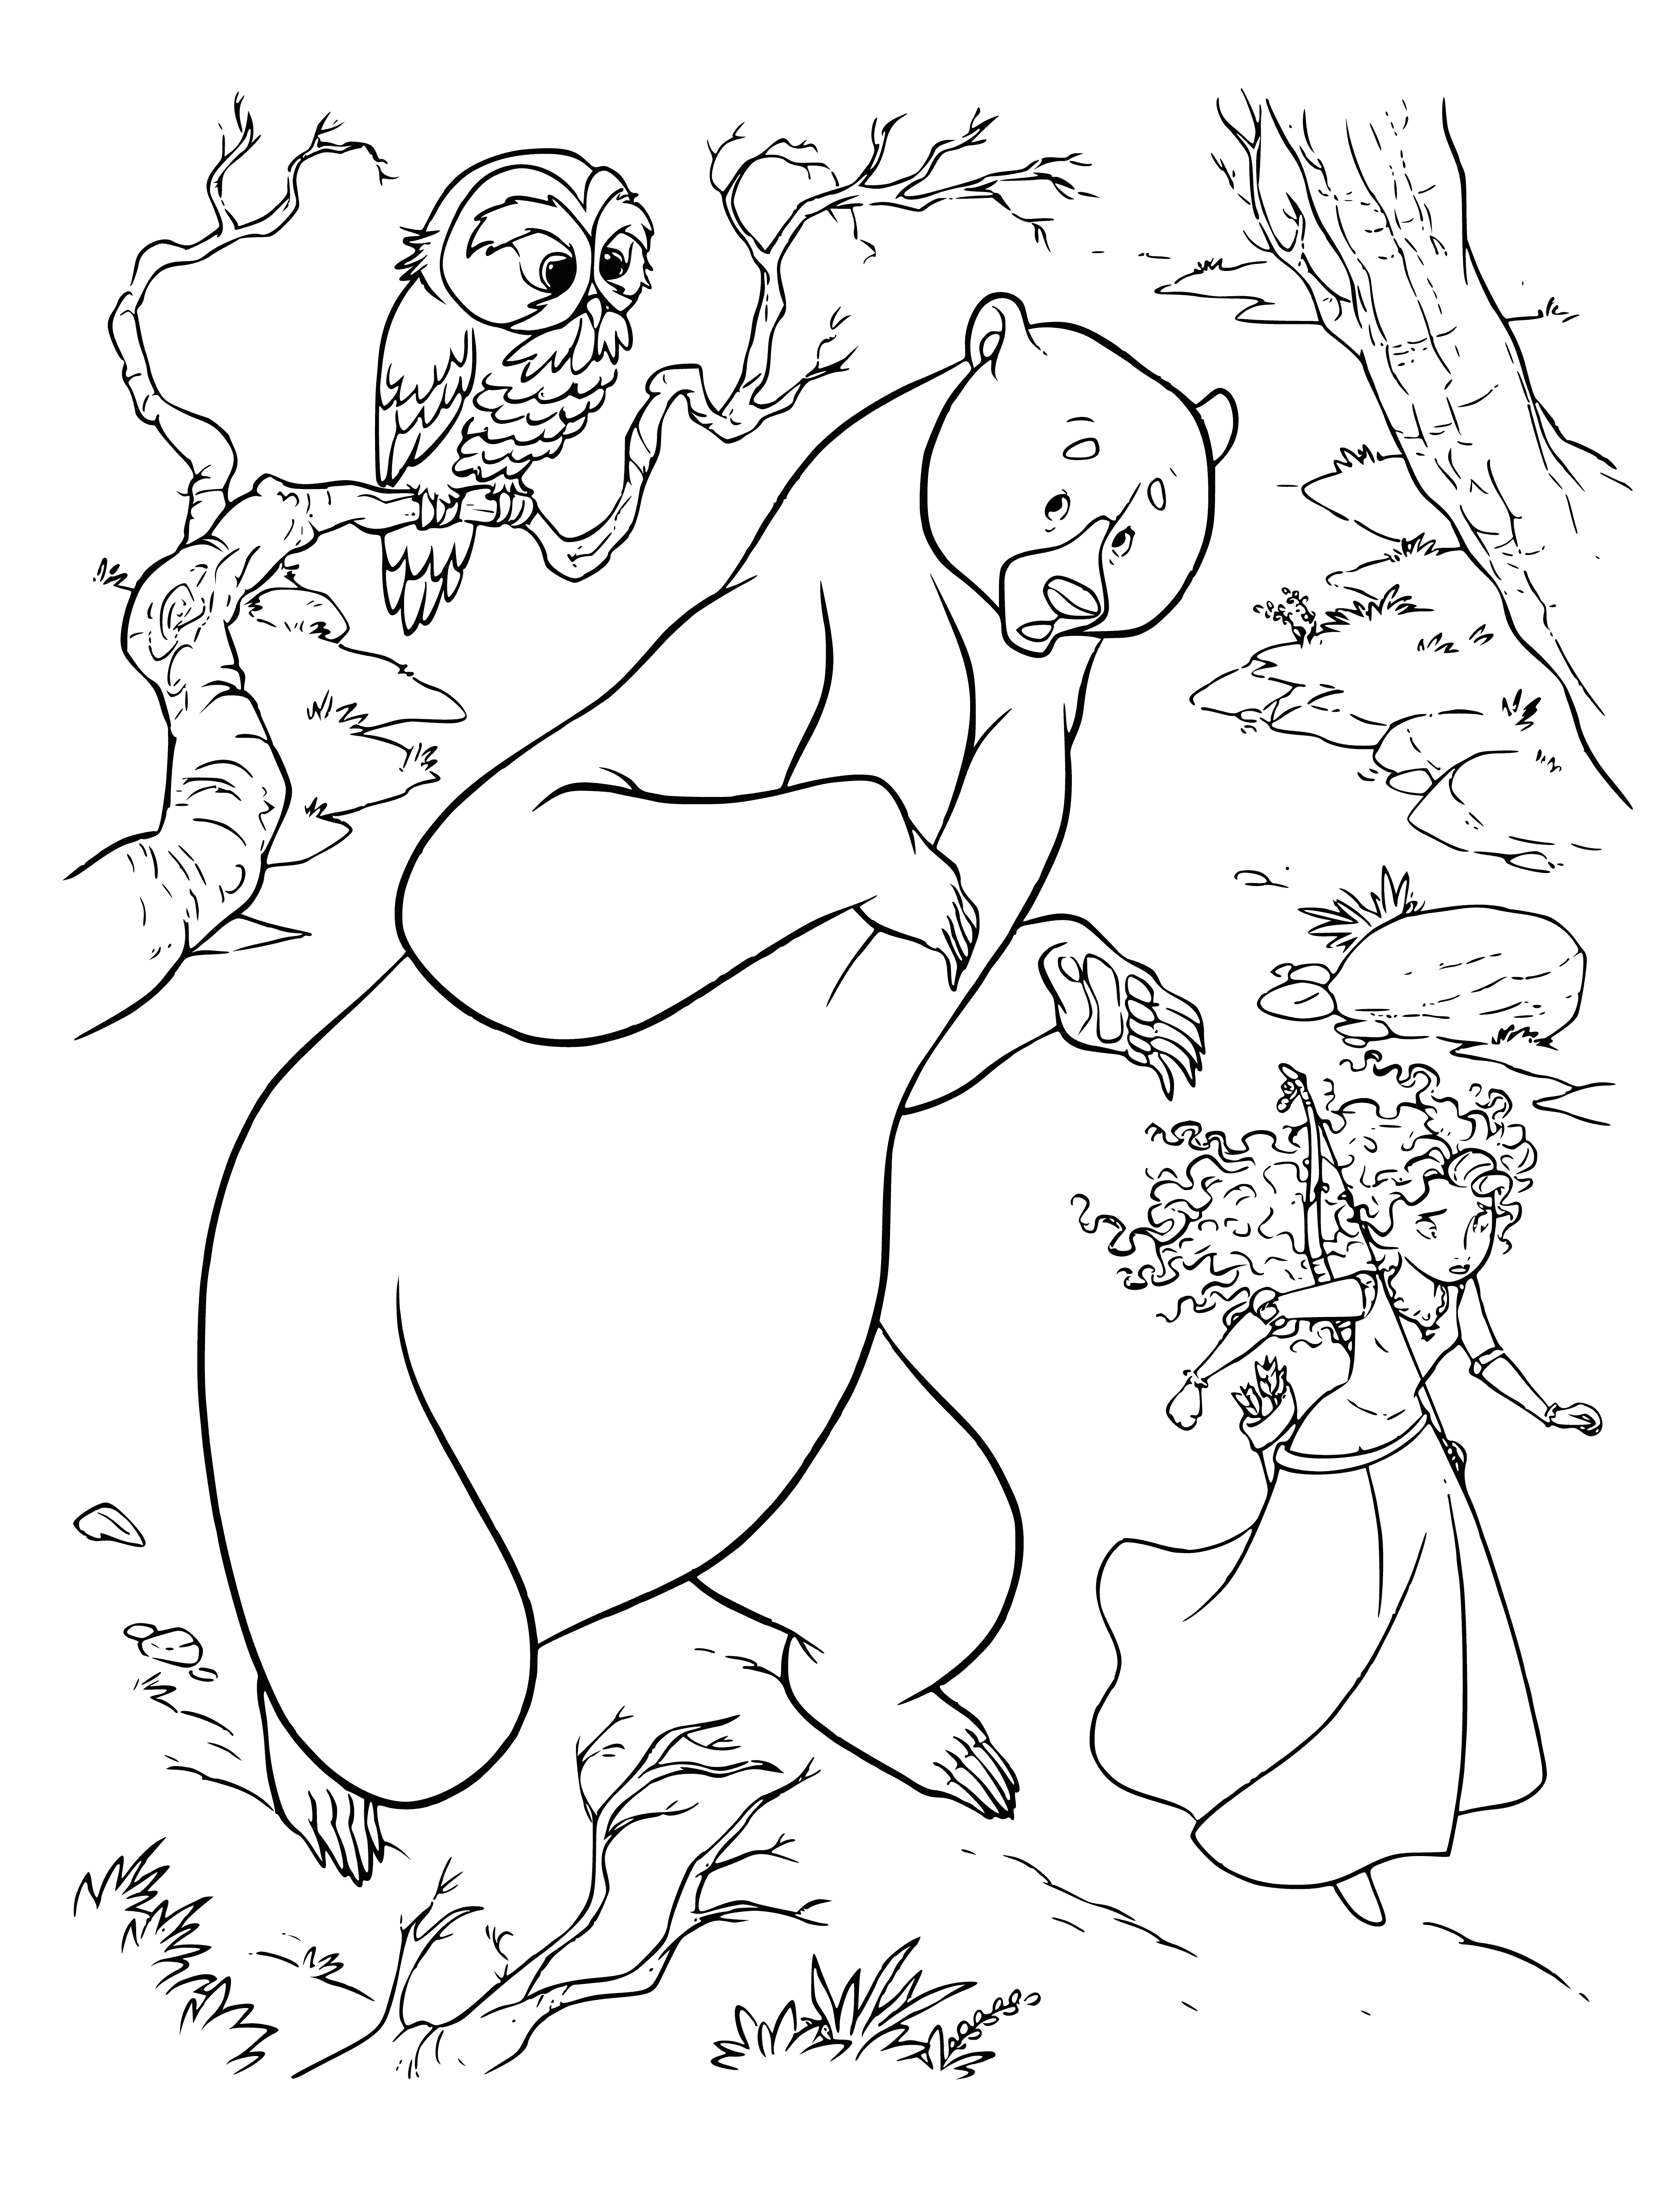 Merida and the bear coloring page